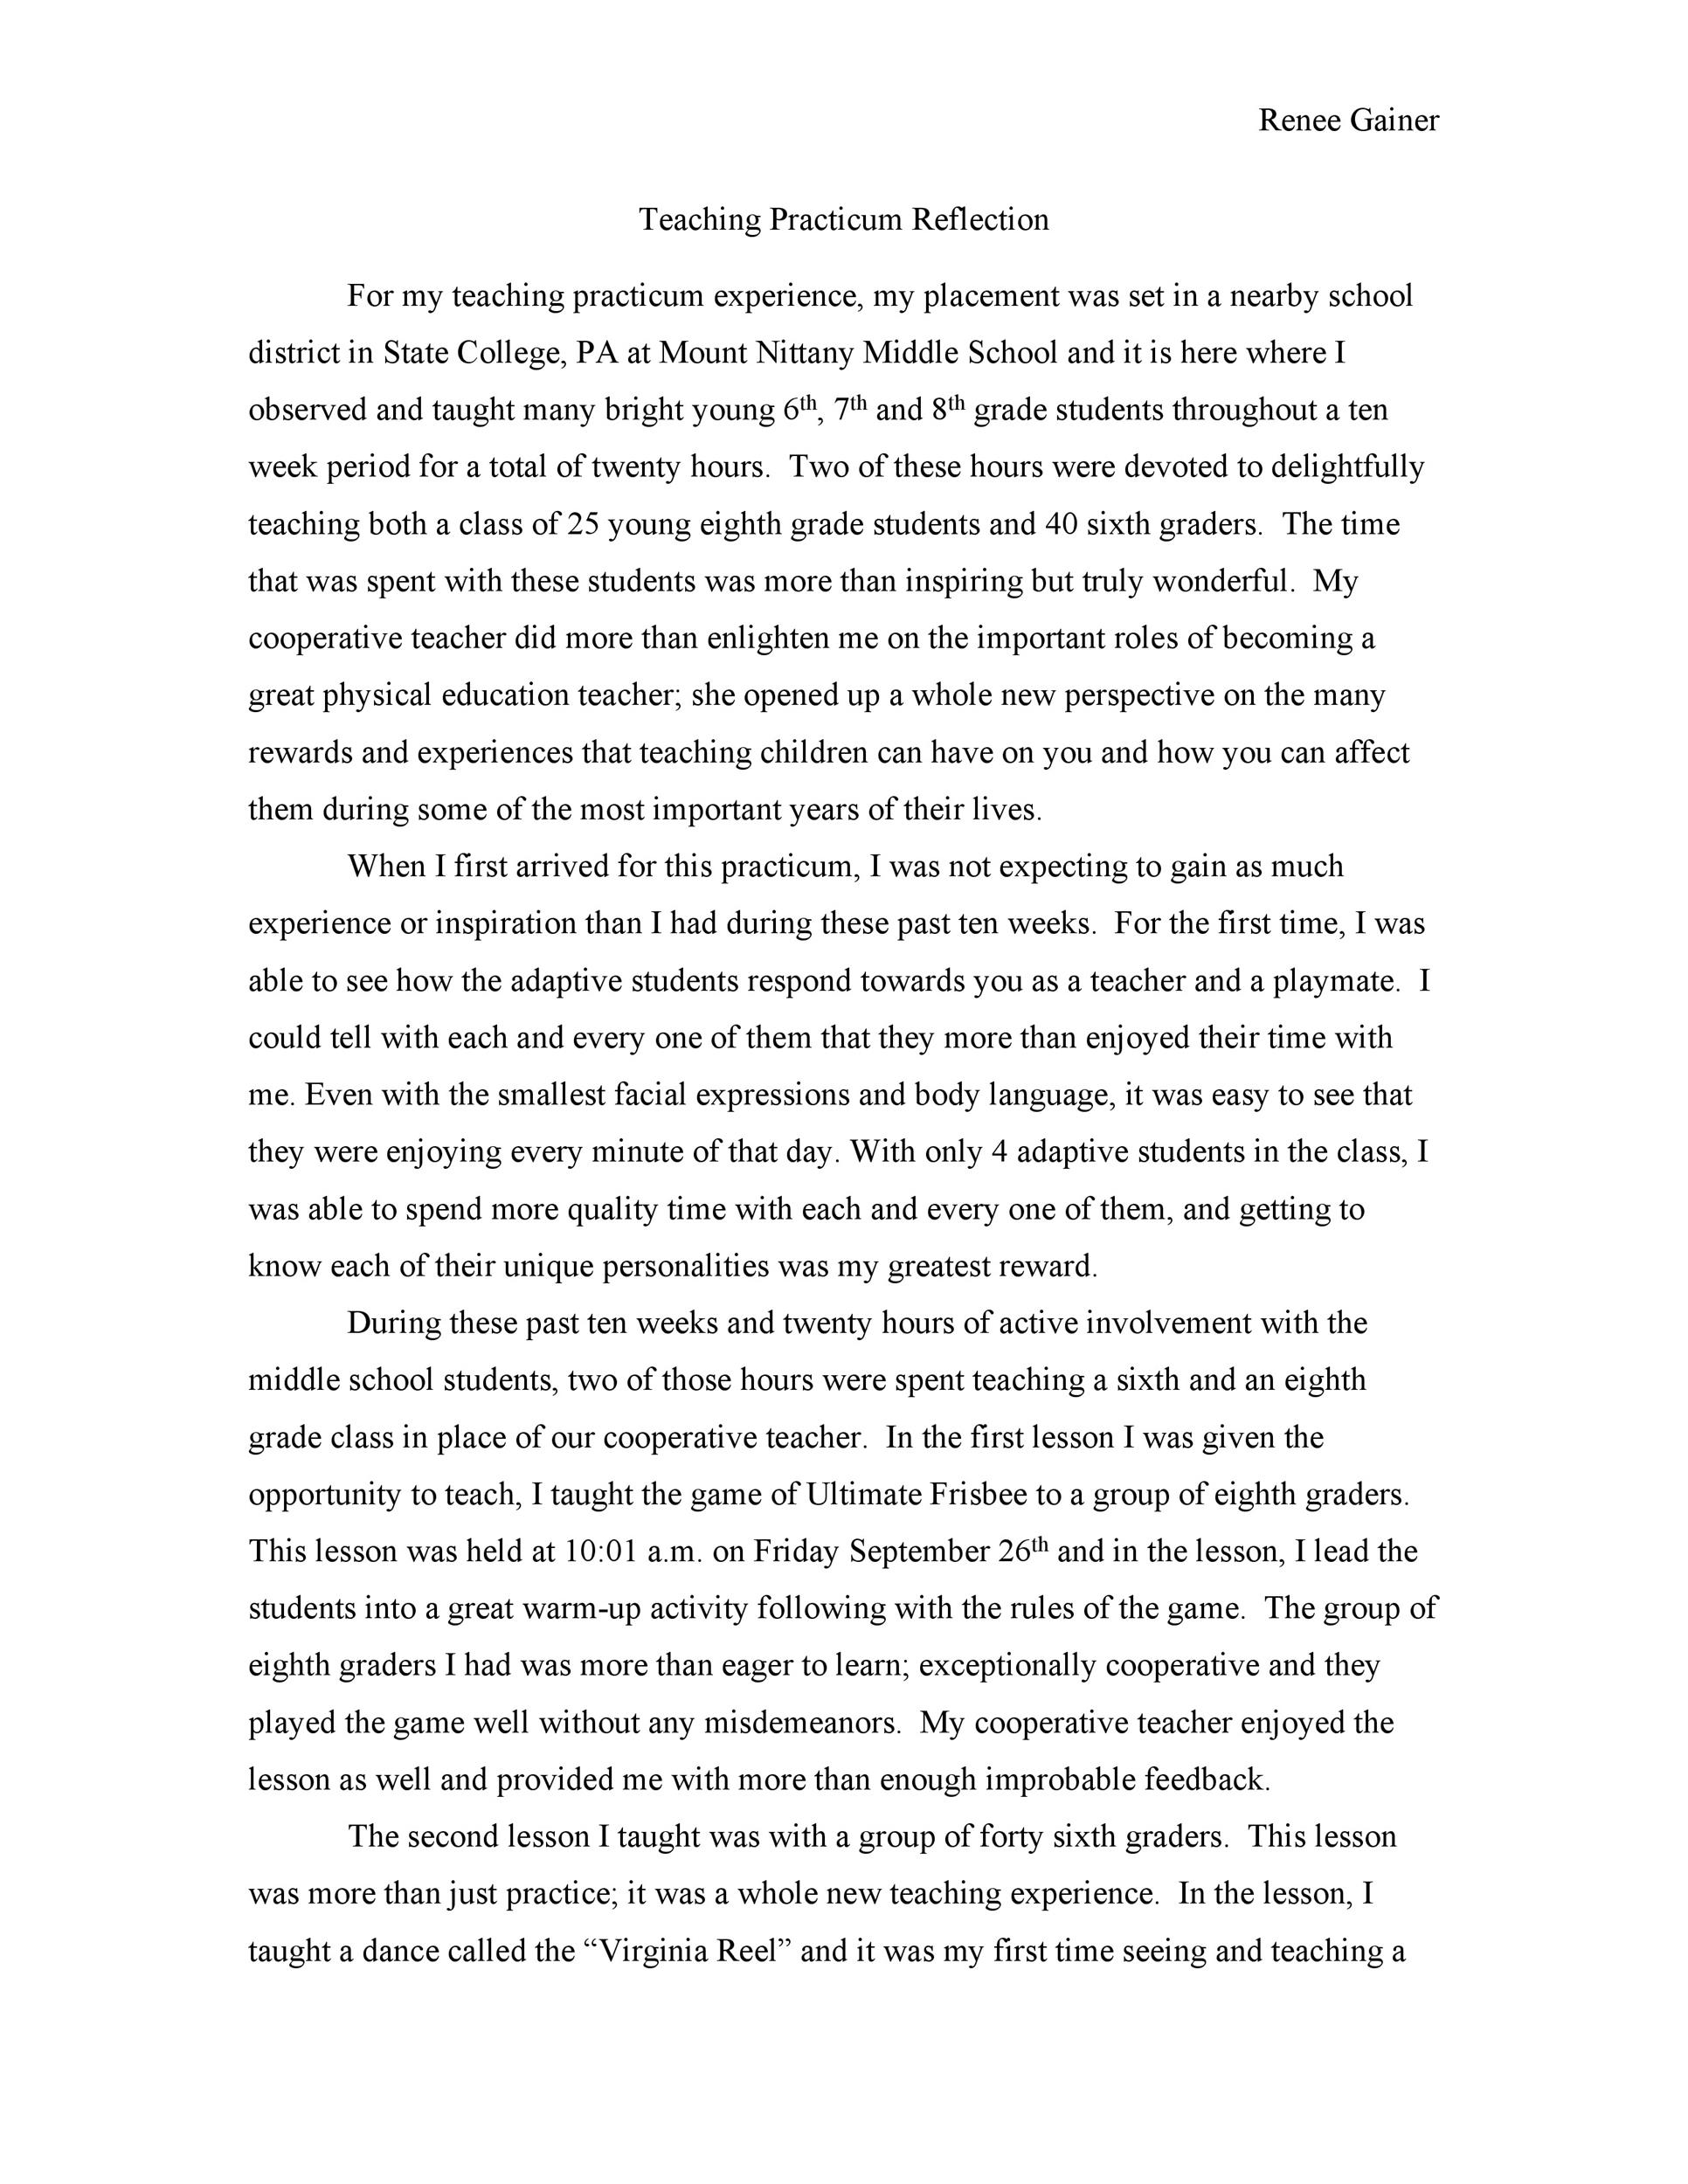 Personal reflection paper example